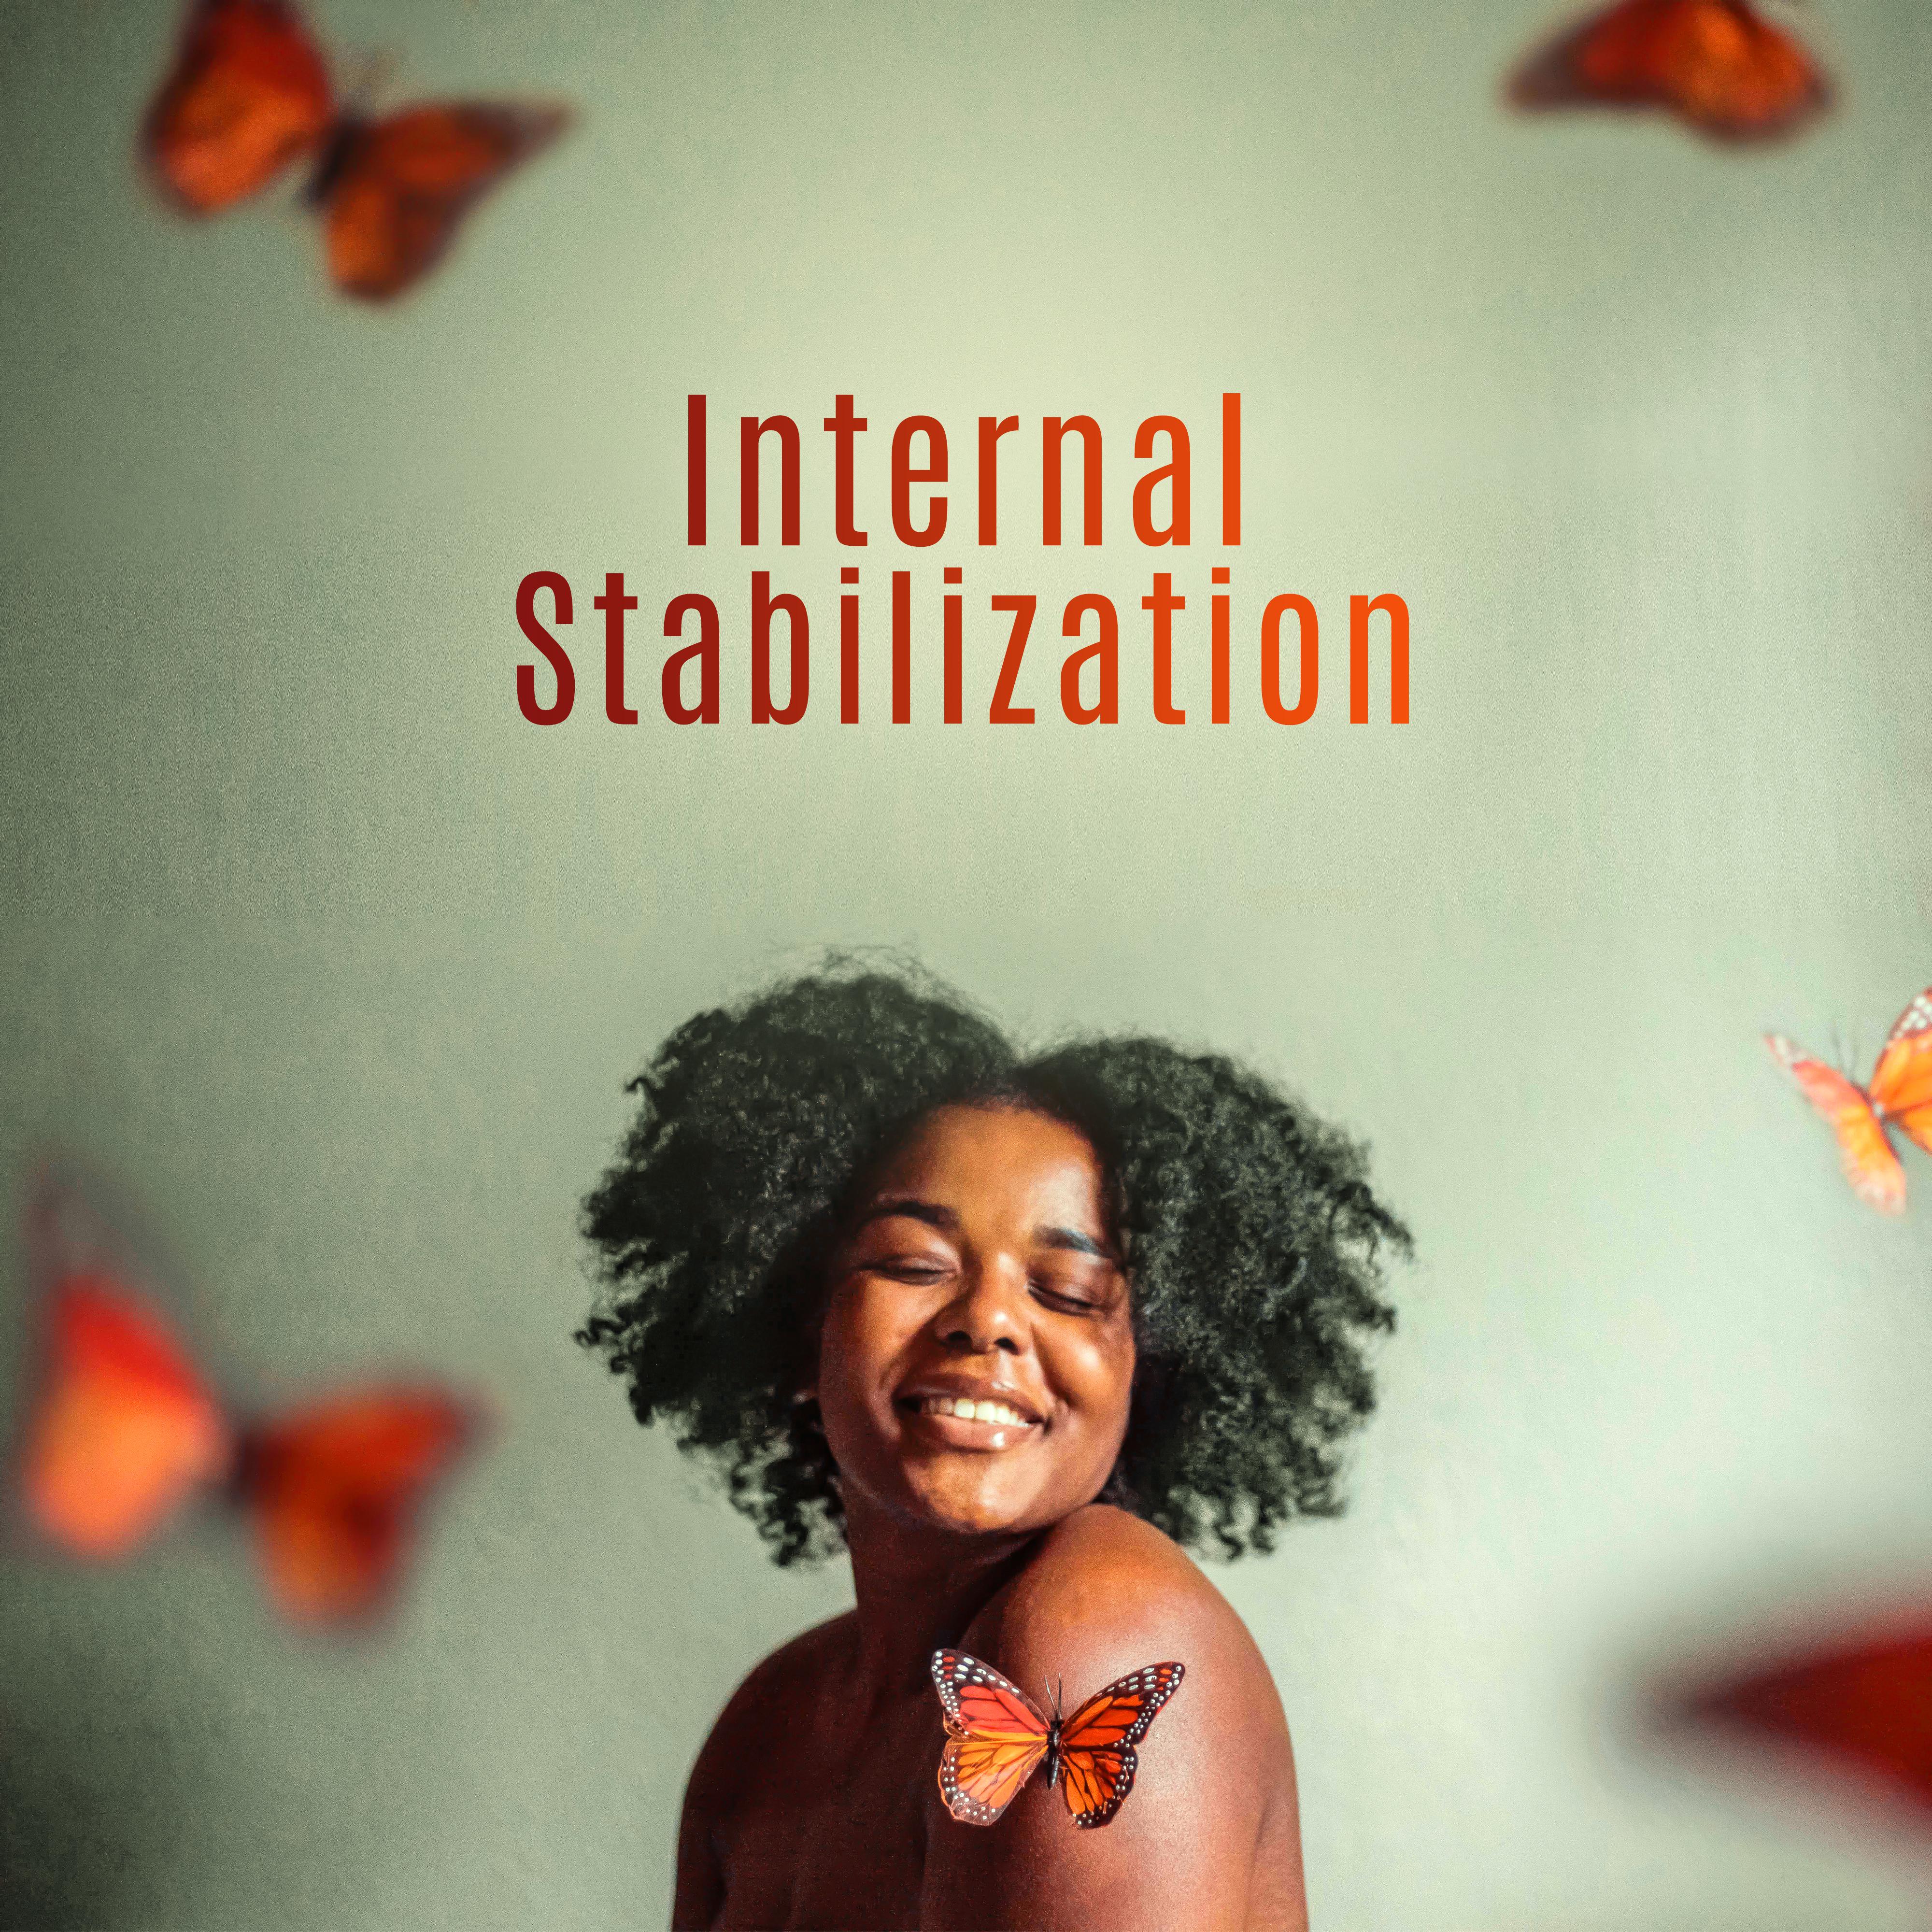 Internal Stabilization  15 Songs that Will Calm you Down, Relax and Bring Relief